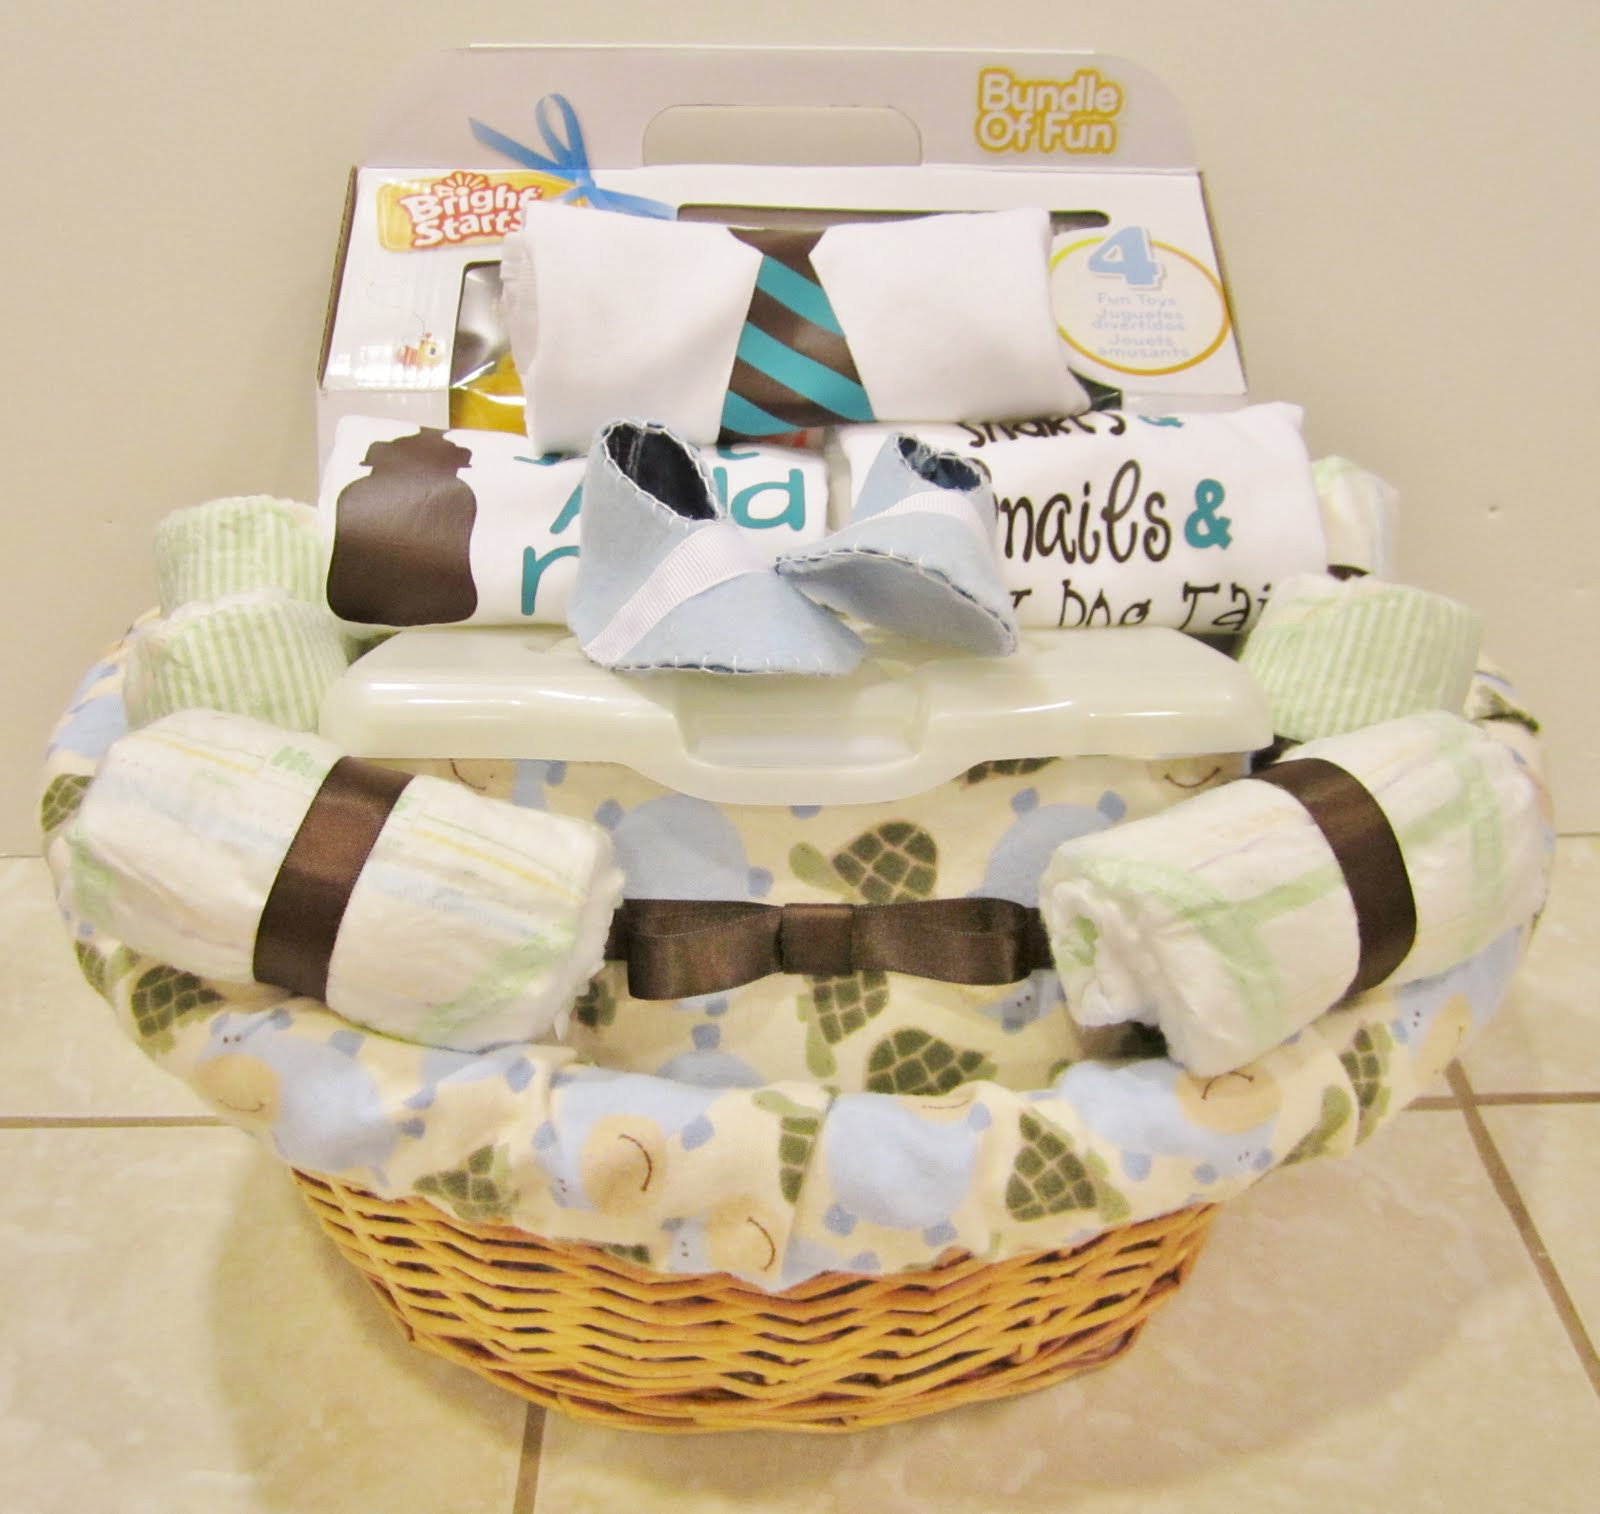 Baby Boy Shower Gift Ideas
 Life in the Motherhood Baby Shower Gift Basket For a